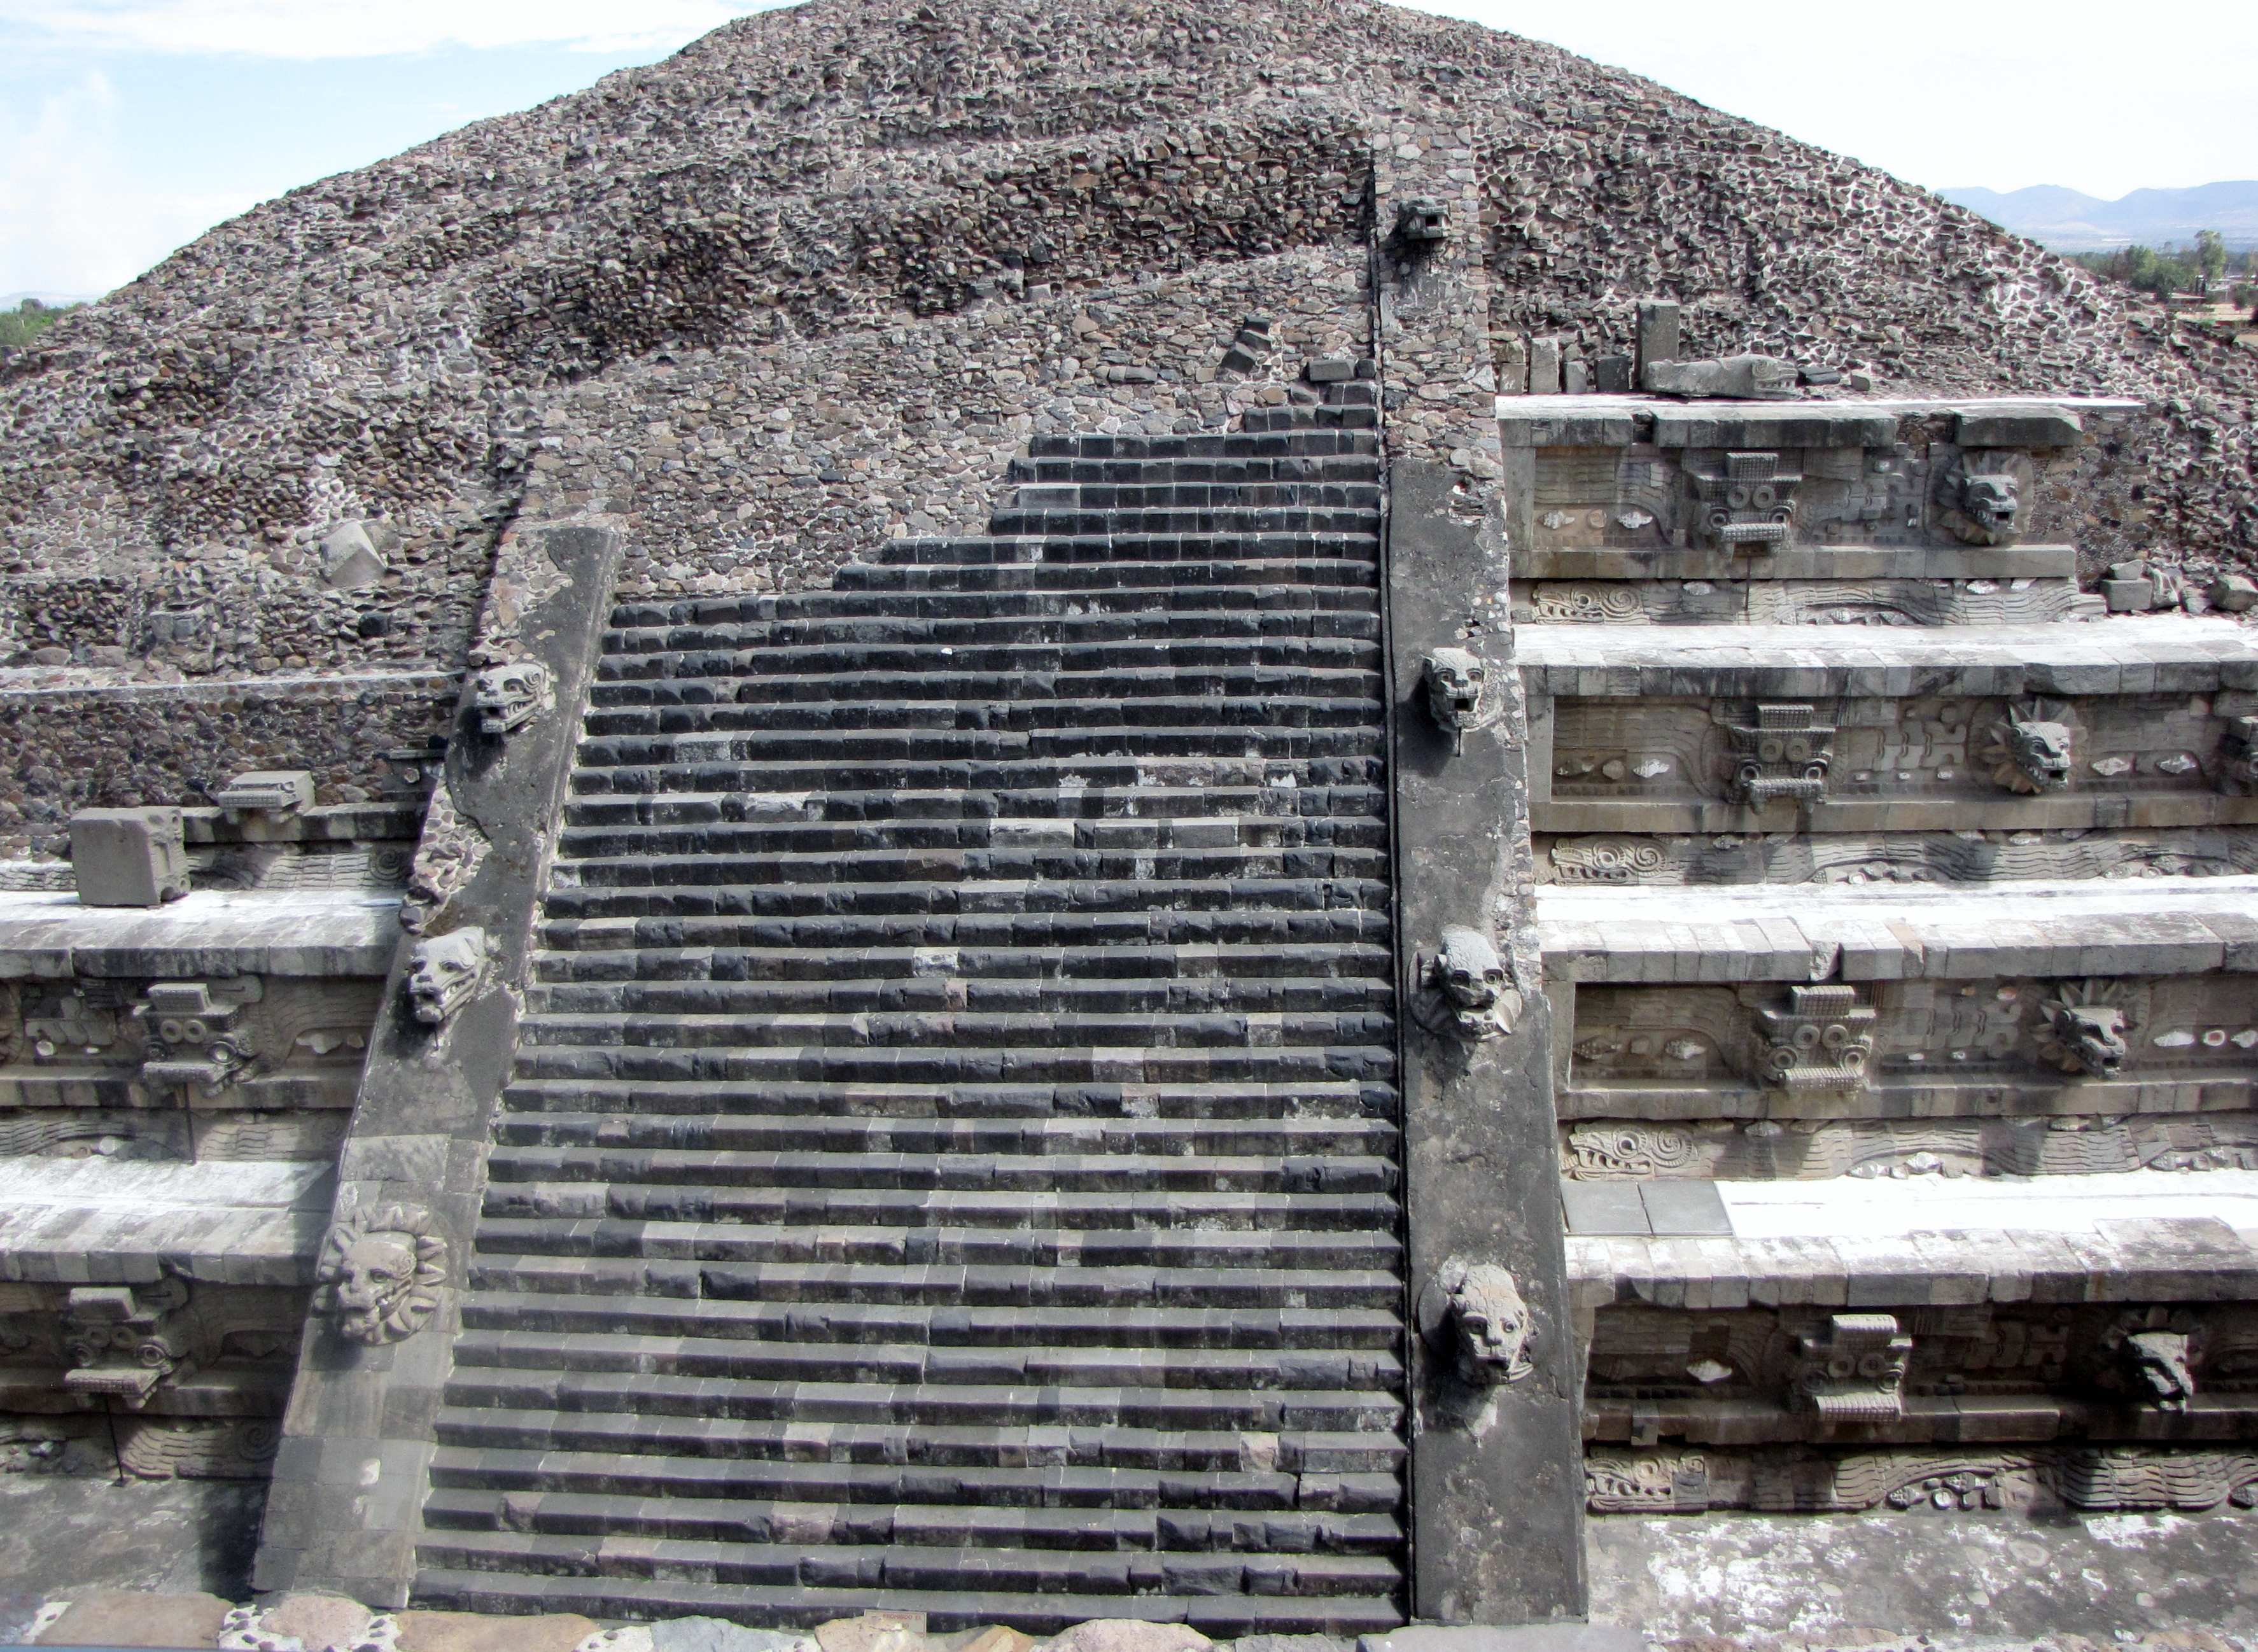 Teotihuacan: pyramids in Mexico City